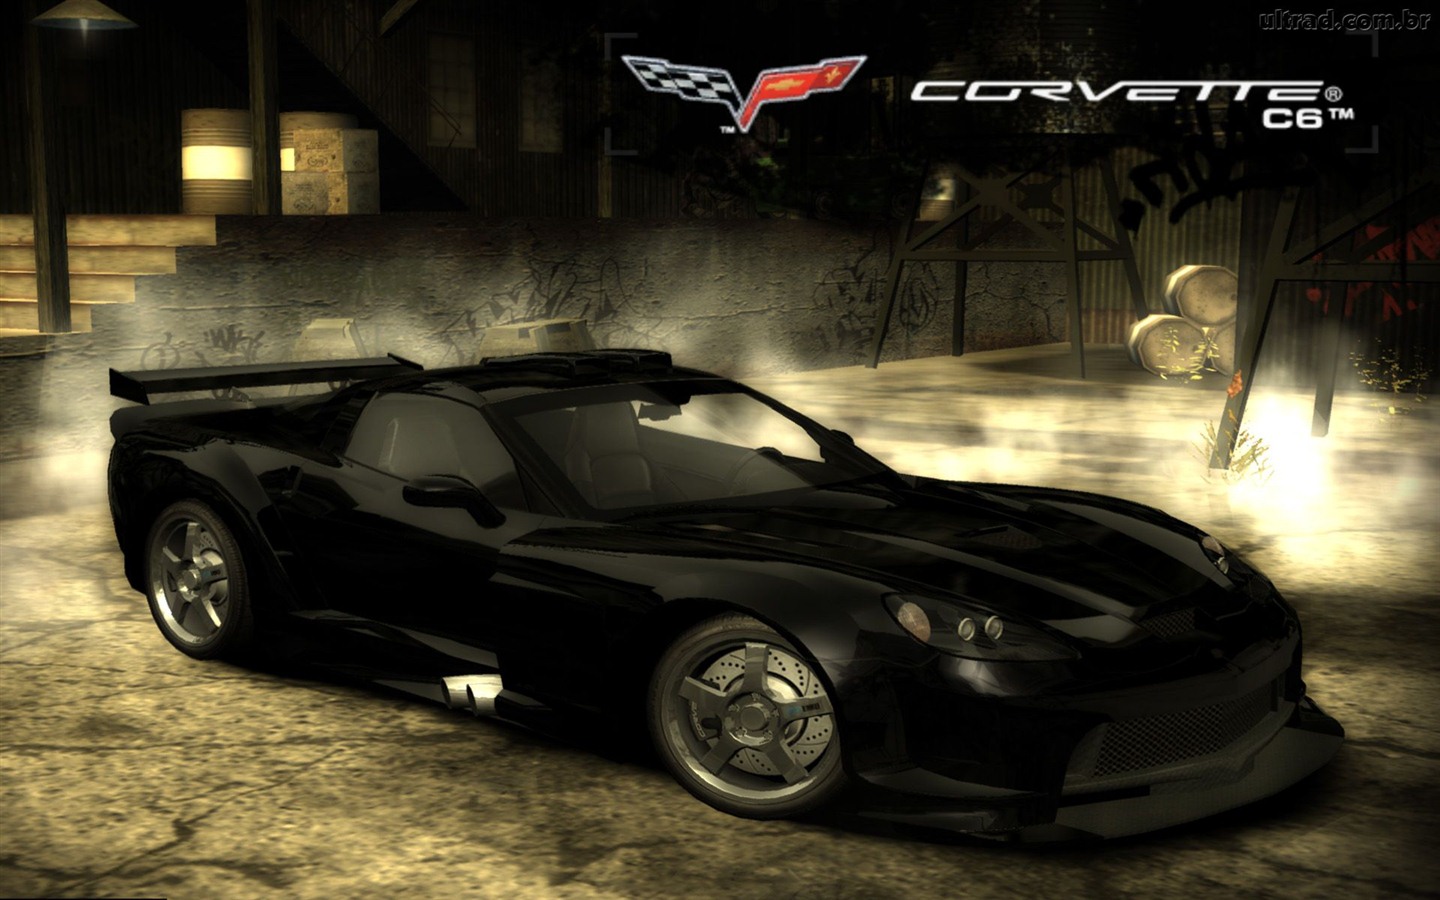 Need for Speed: Most Wanted 极品飞车17：最高通缉 高清壁纸3 - 1440x900